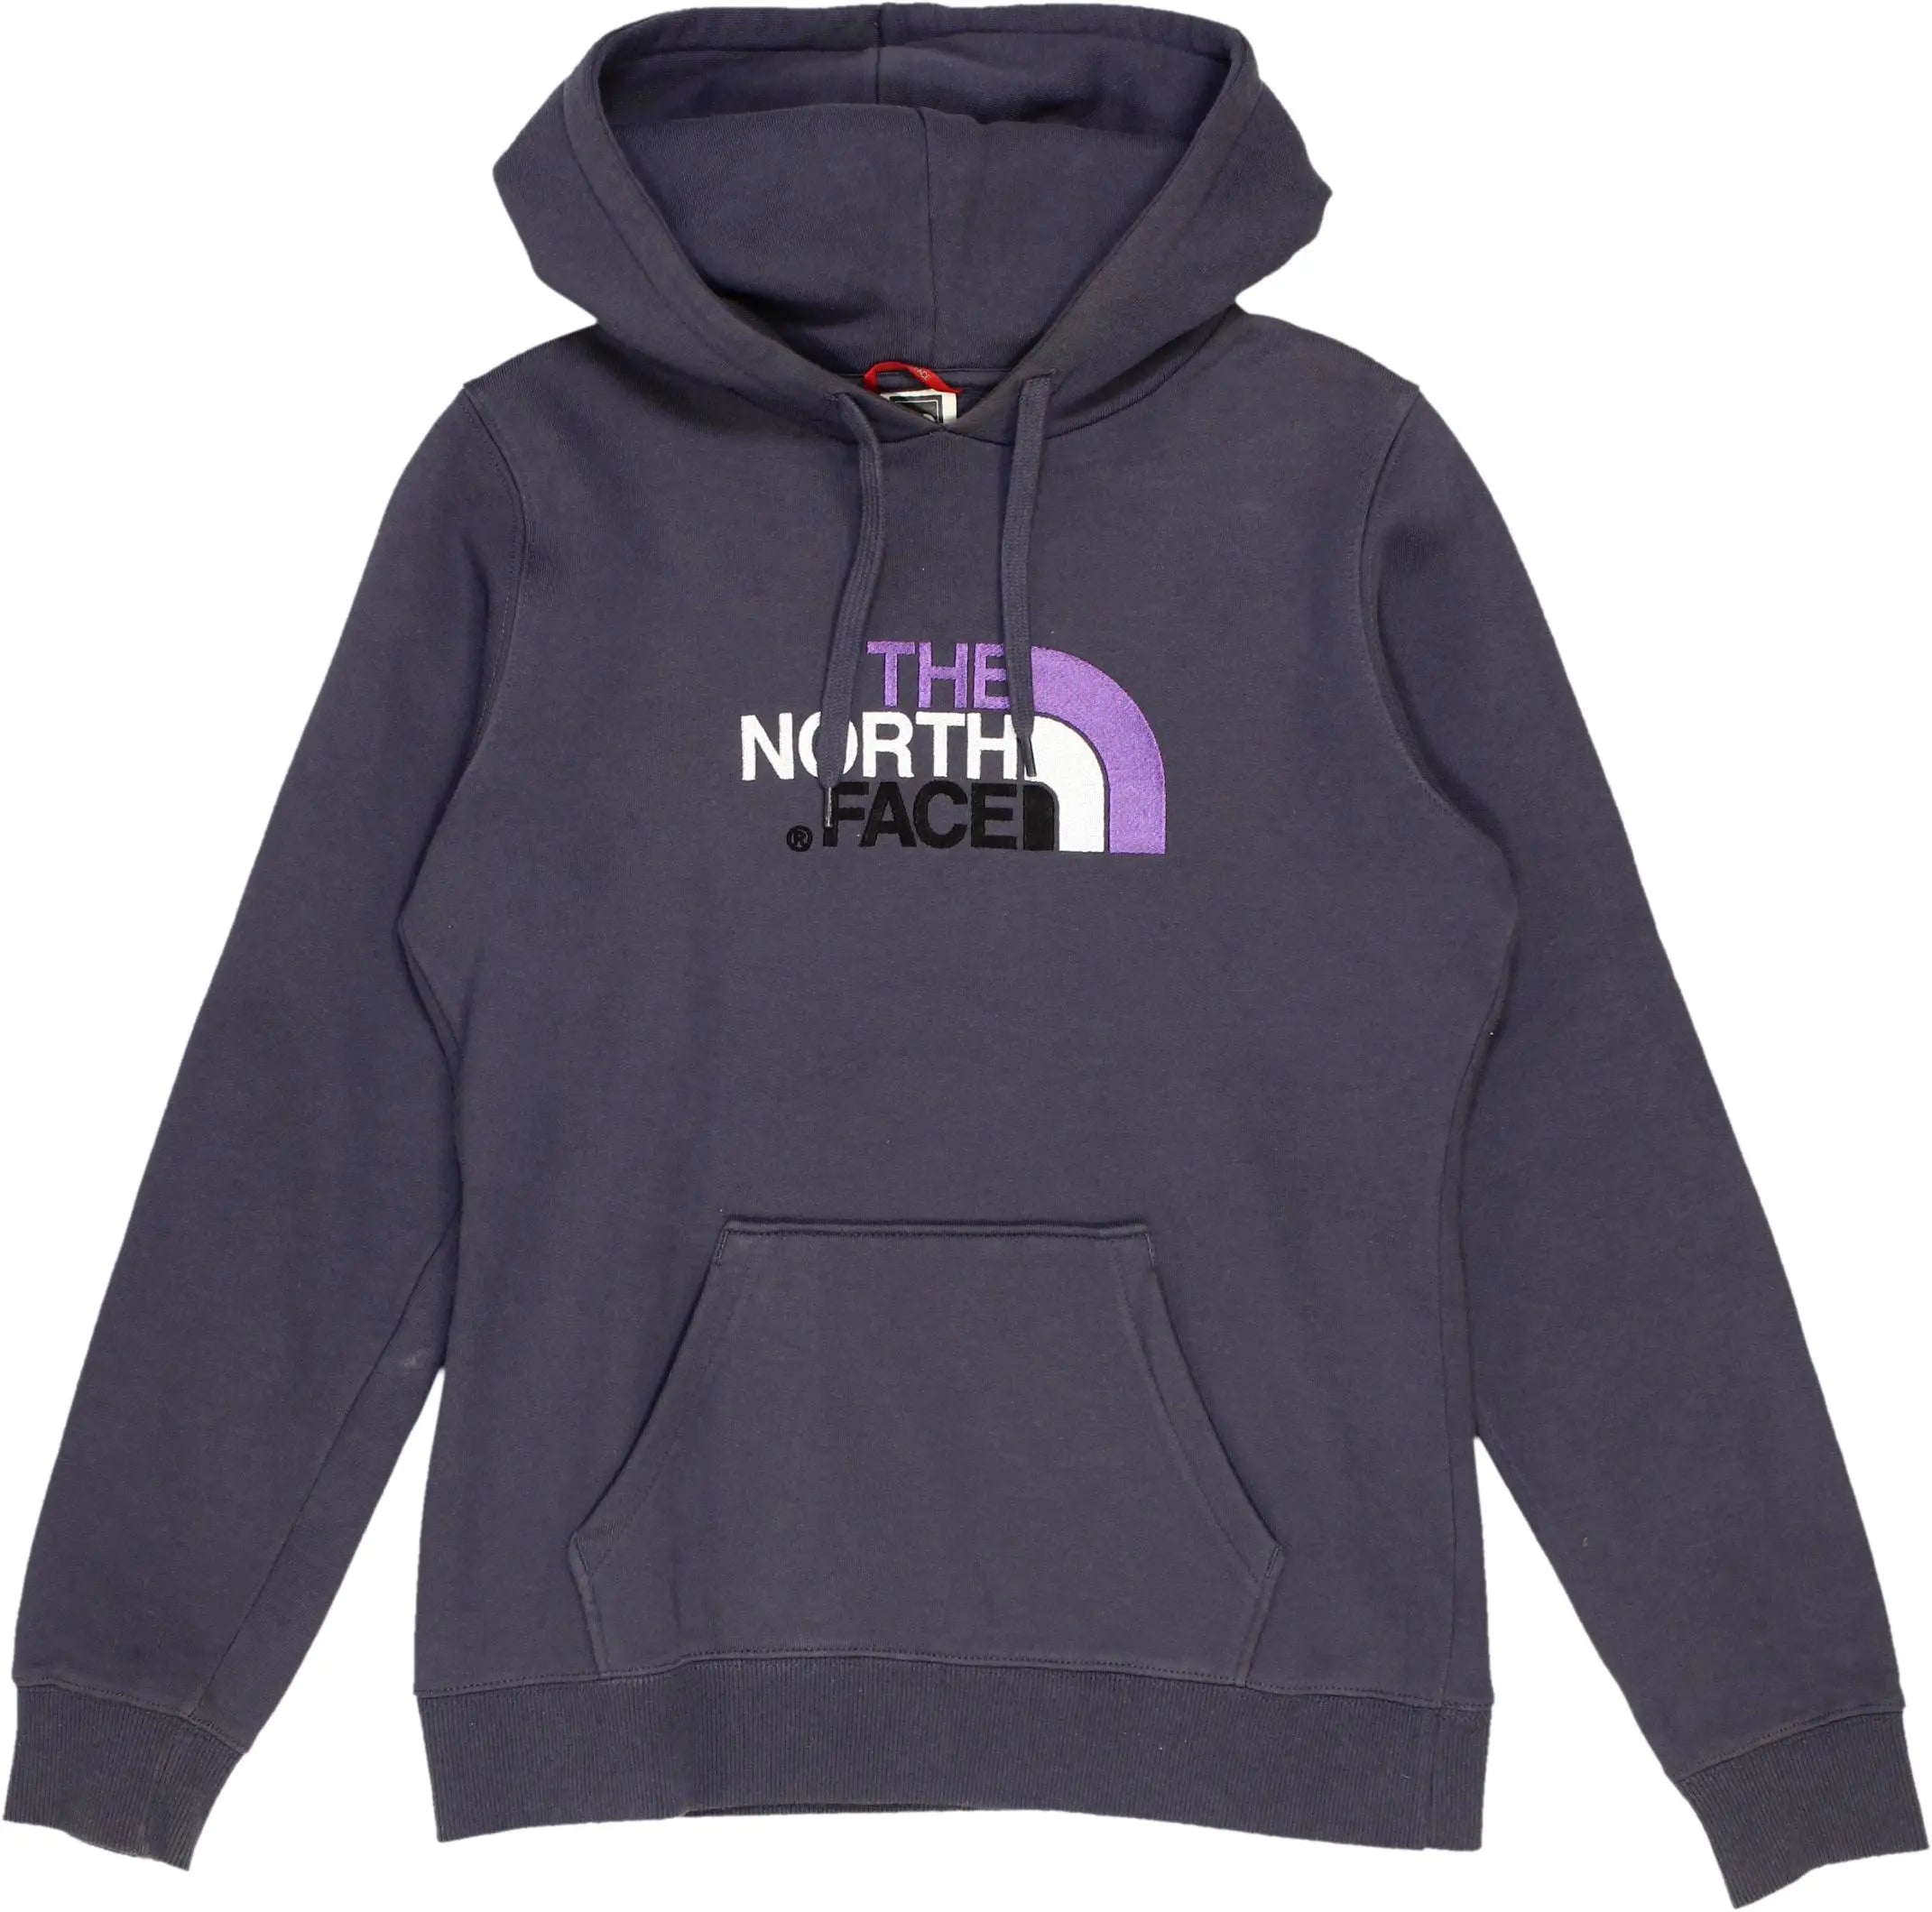 The North Face - Purple Hoodie by The North Face- ThriftTale.com - Vintage and second handclothing